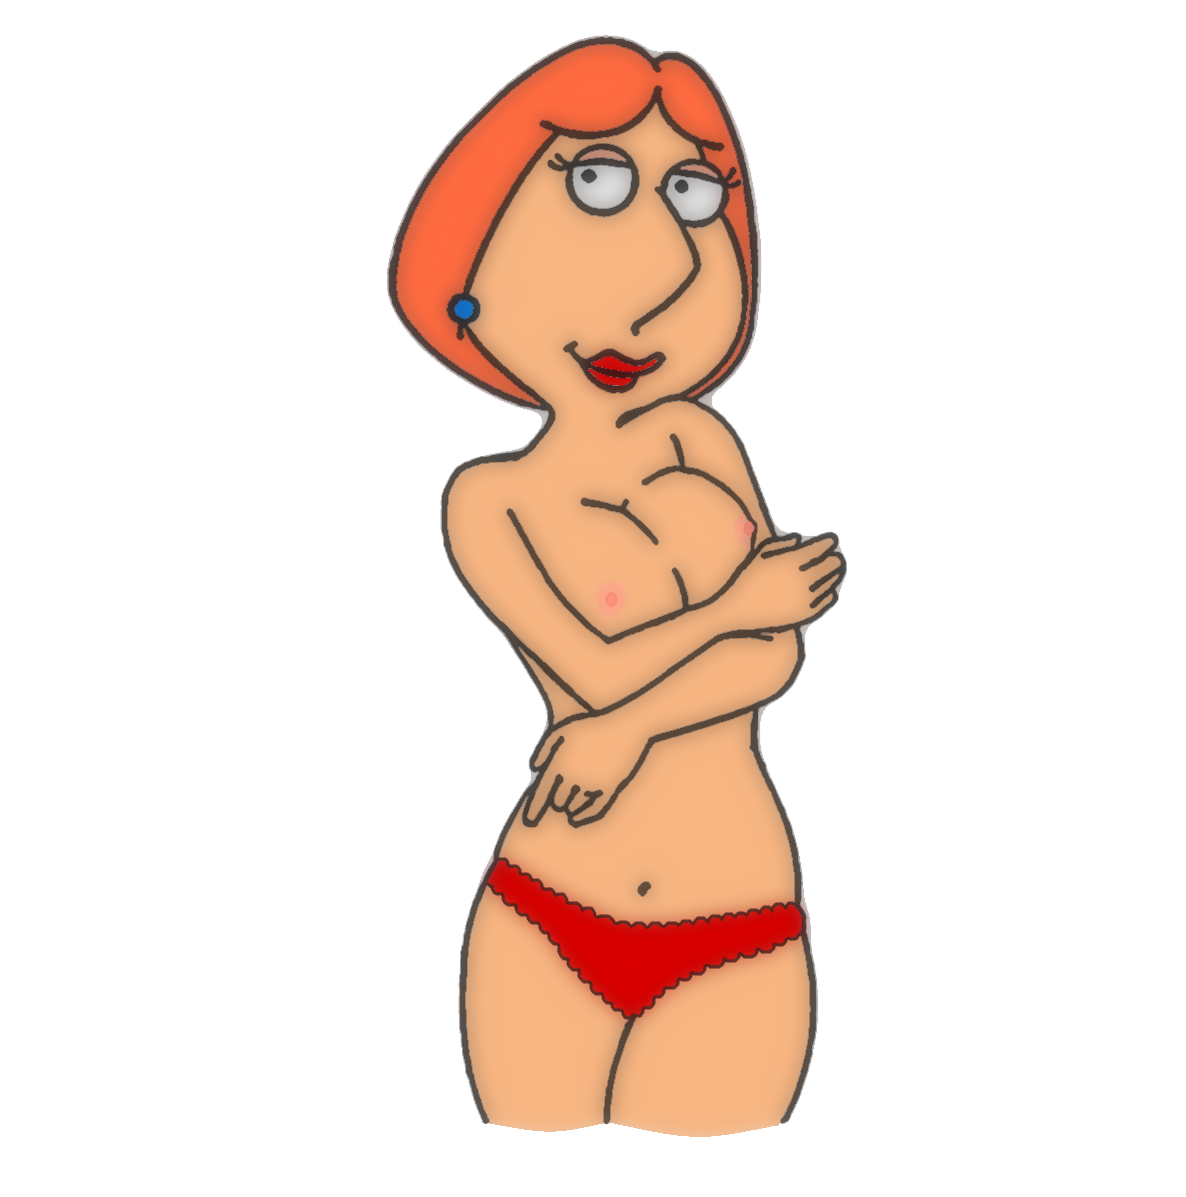 Lois griffin nude gynecologist, movies to masturbate to